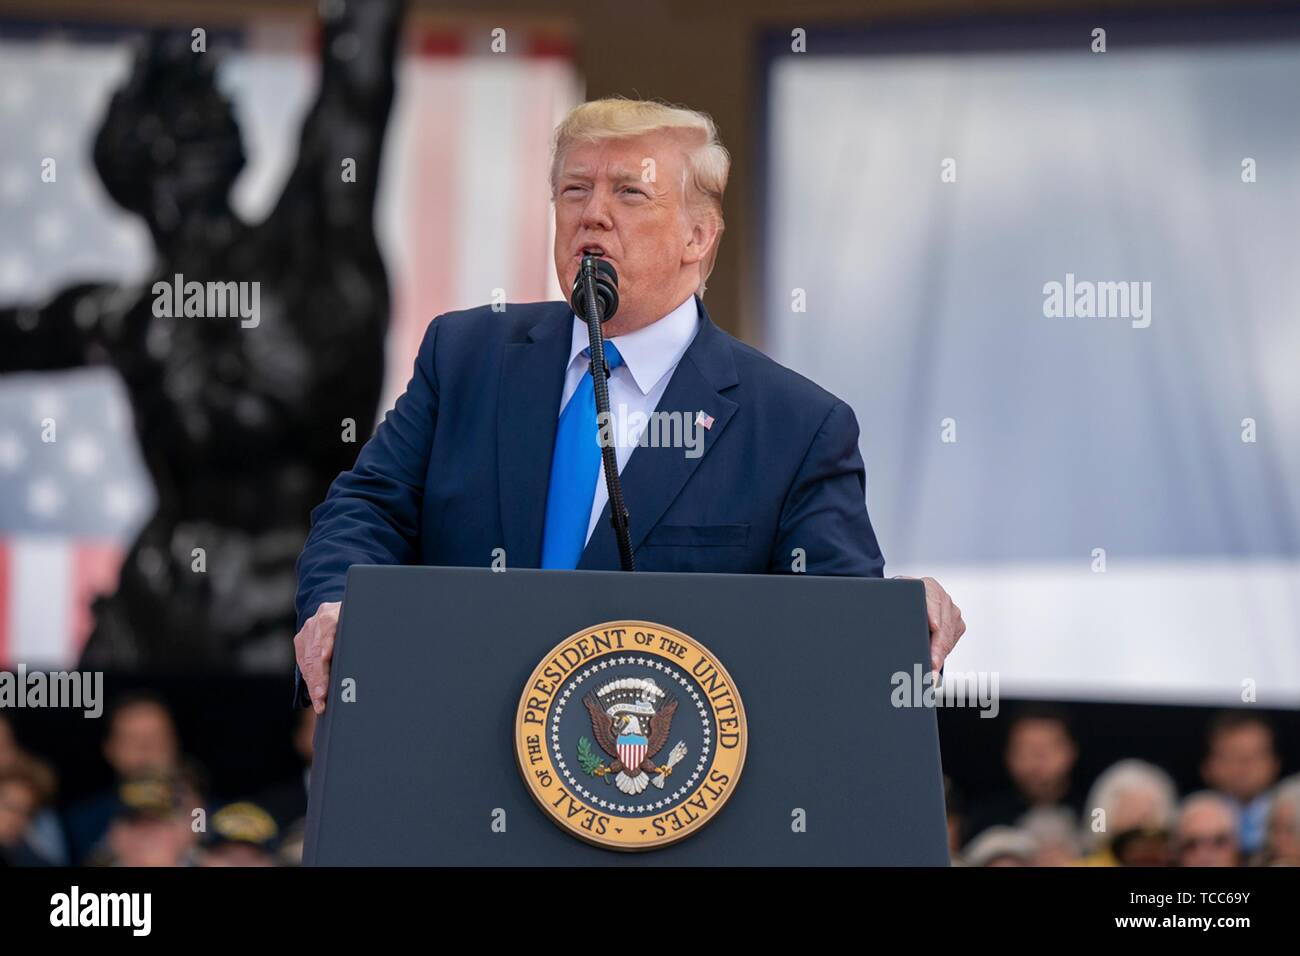 Colleville Sur Mer, France. 06th June, 2019. U.S. President Donald Trump delivers remarks during the commemoration ceremony marking the 75th D-Day Anniversary at the Normandy American Cemetery and Memorial June 6, 2019 in Colleville-sur-Mer, France. Thousands have converged on Normandy to commemorate the 75th anniversary of Operation Overlord, the WWII Allied invasion commonly known as D-Day. Credit: Planetpix/Alamy Live News Stock Photo